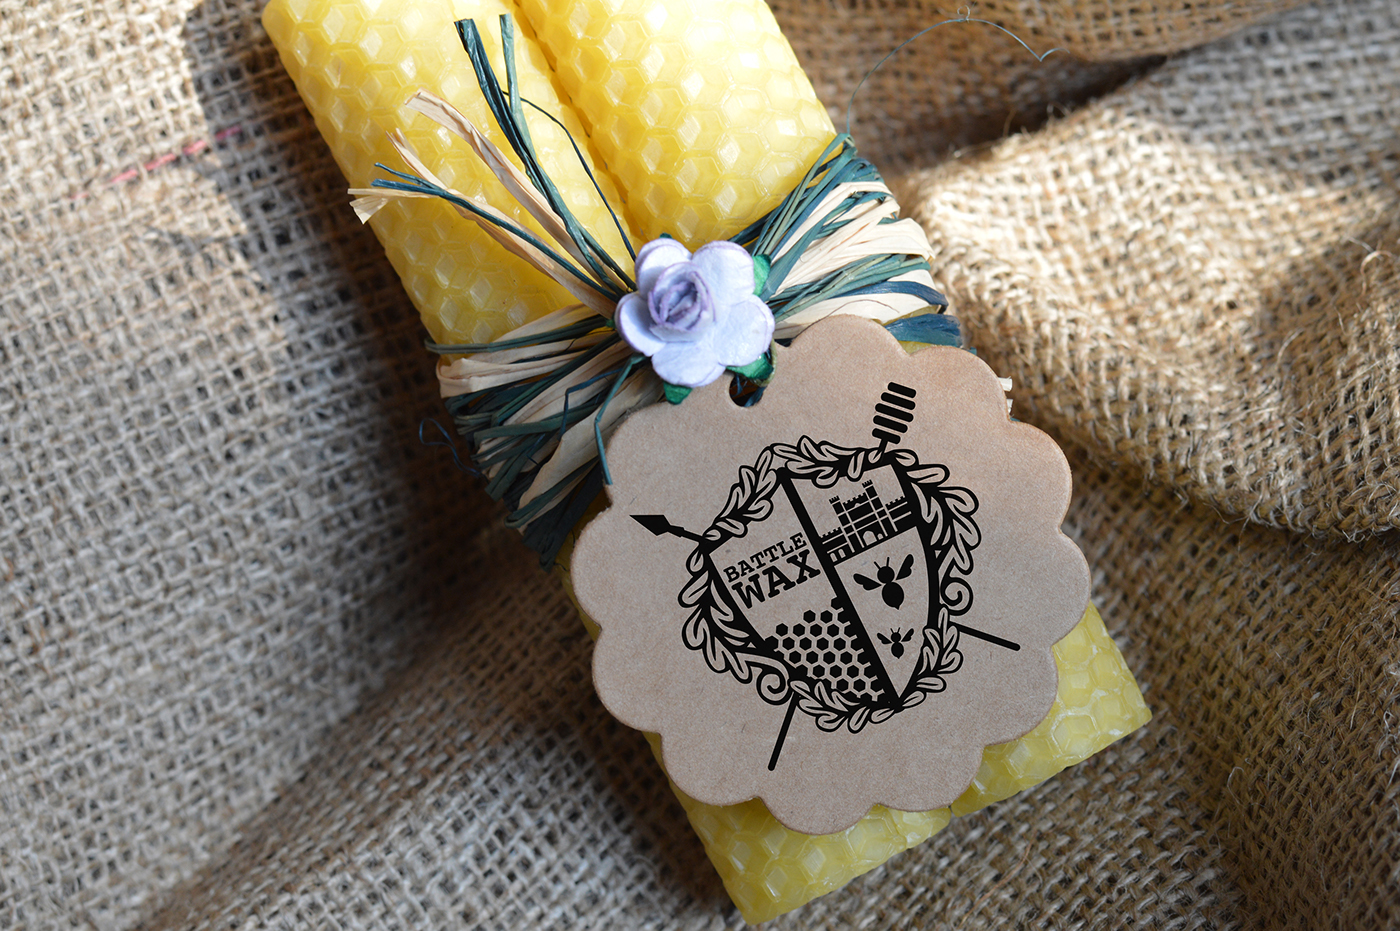 logo brand cadle honey wax bees bumble stamp natural Nature history battle East Sussex abbey tag